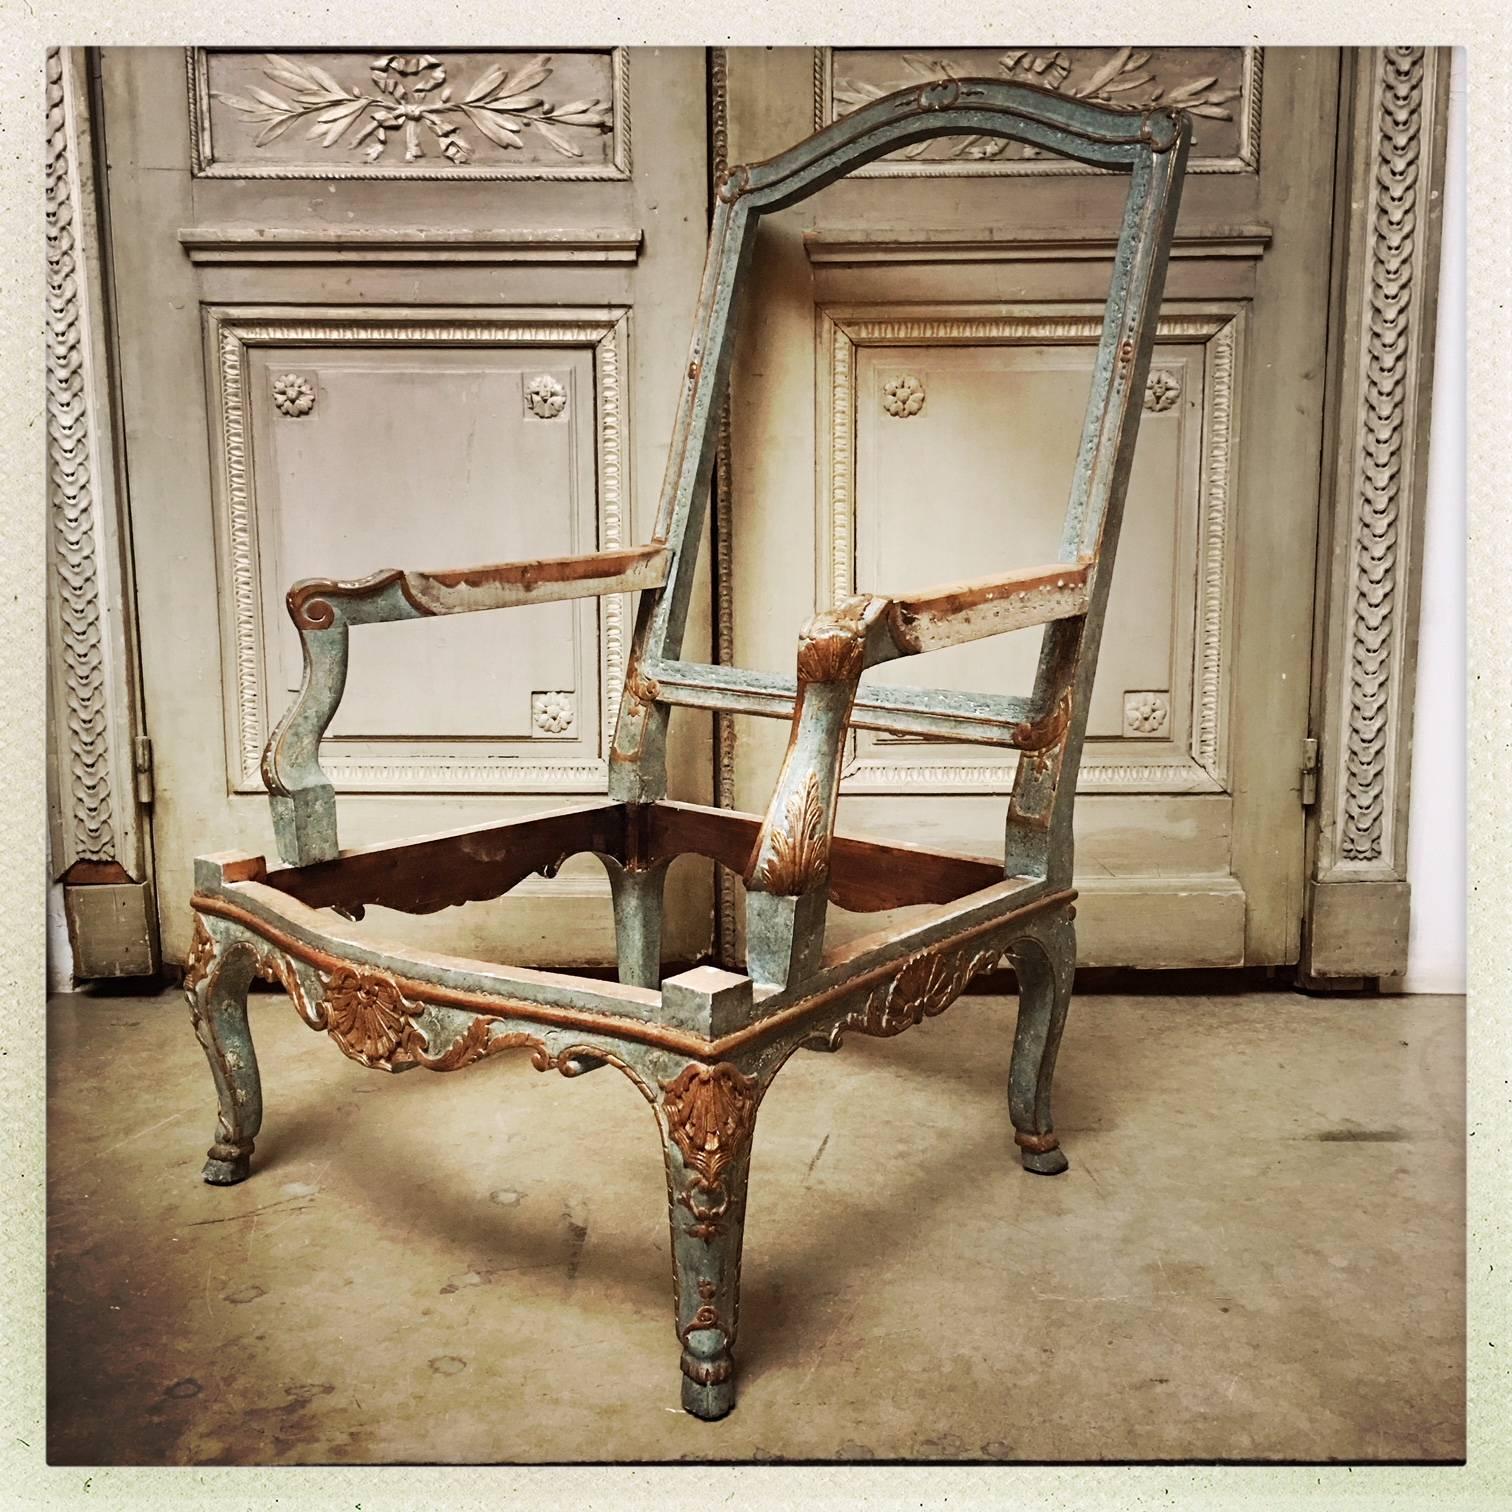 A large pair of French Baroque style Armchair Frames with a blue paint and parcel gilt finish.
This highly decorative pair of chair frames are elegant and large and ready to be upholstered. They have a recent hand painted and gilt finish, but the